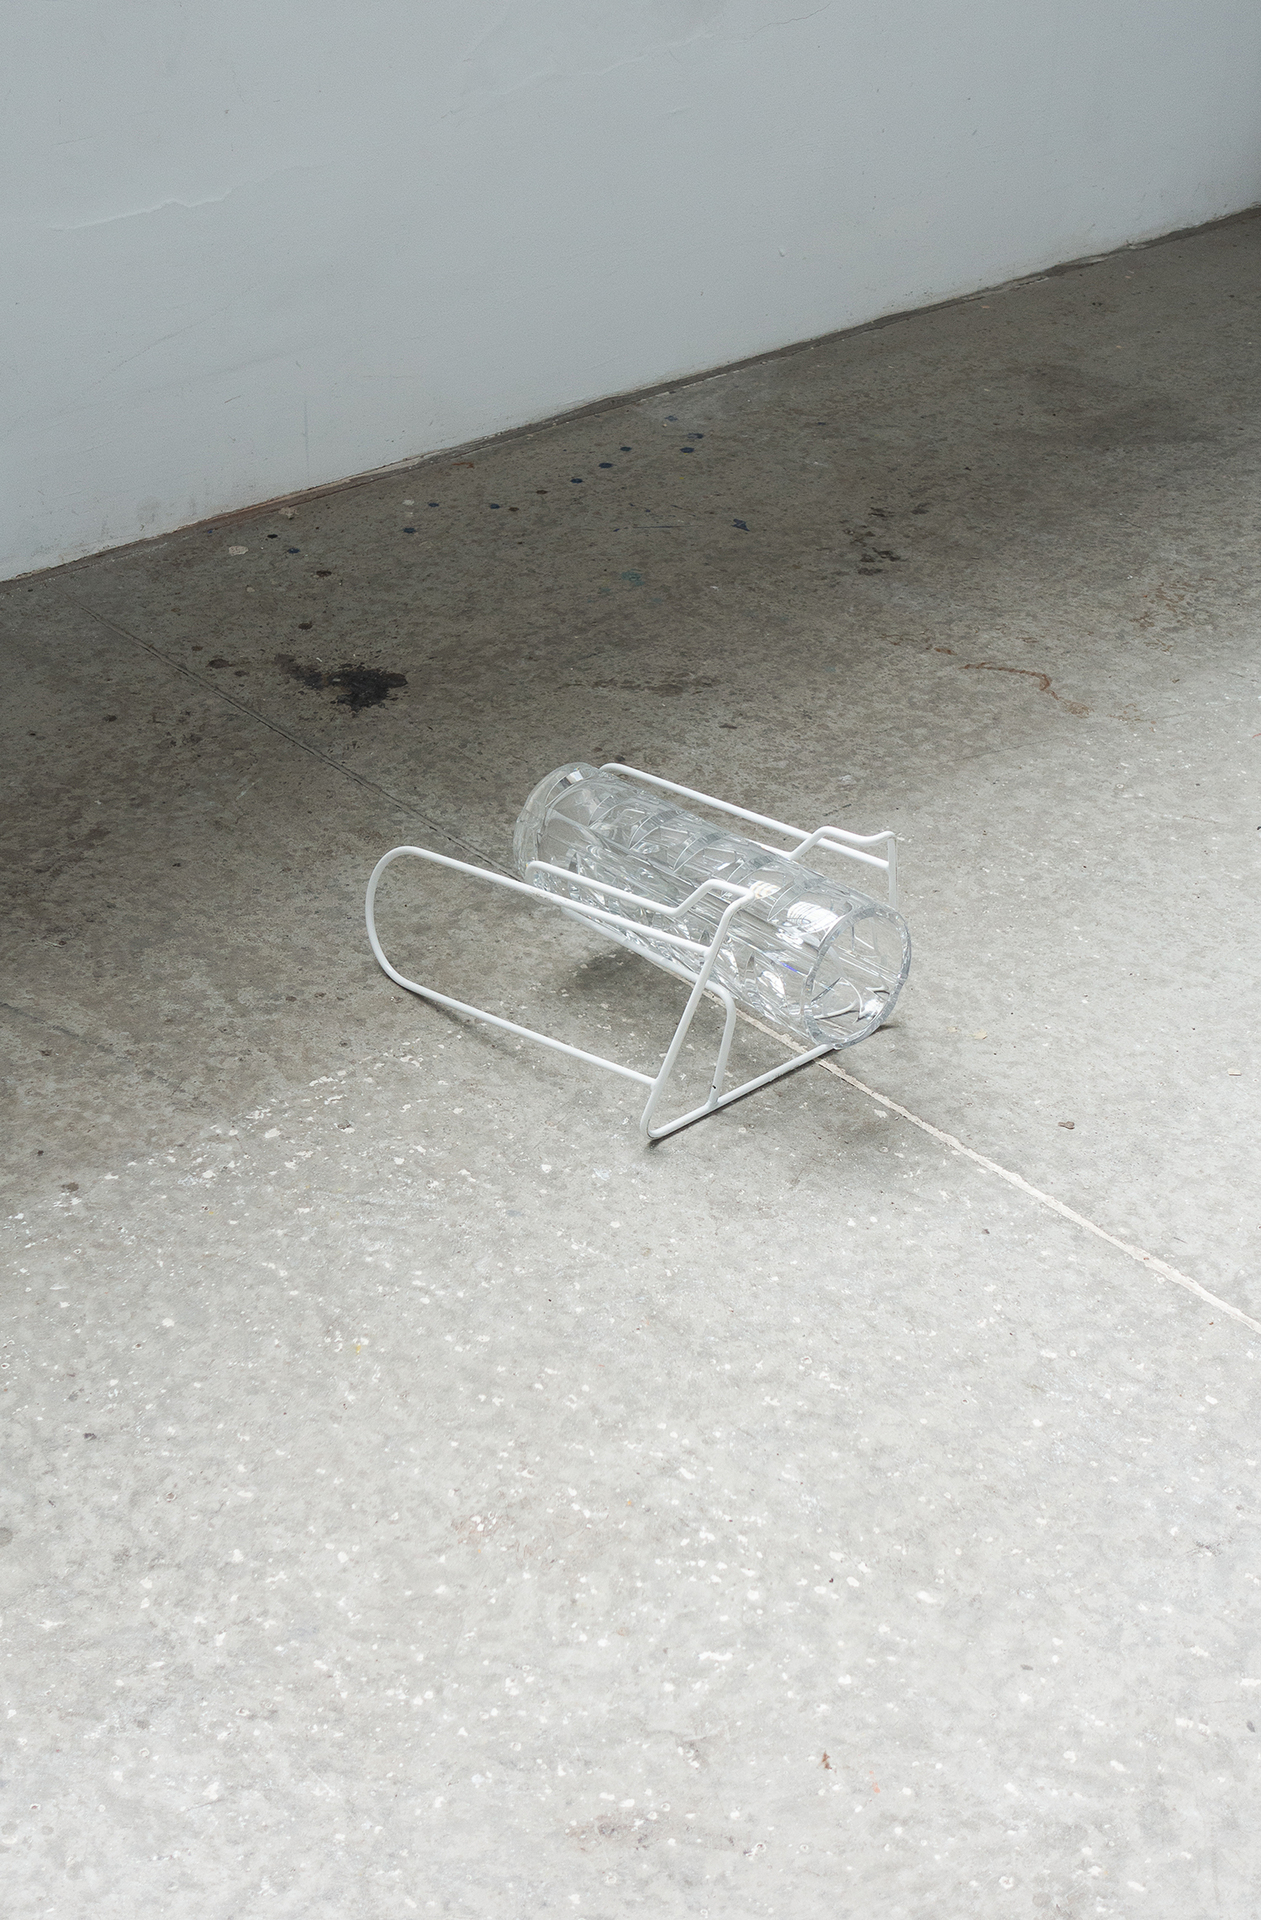 Gleb Amankulov, Too low to load, 2022, glass, metal, Dimensions variable